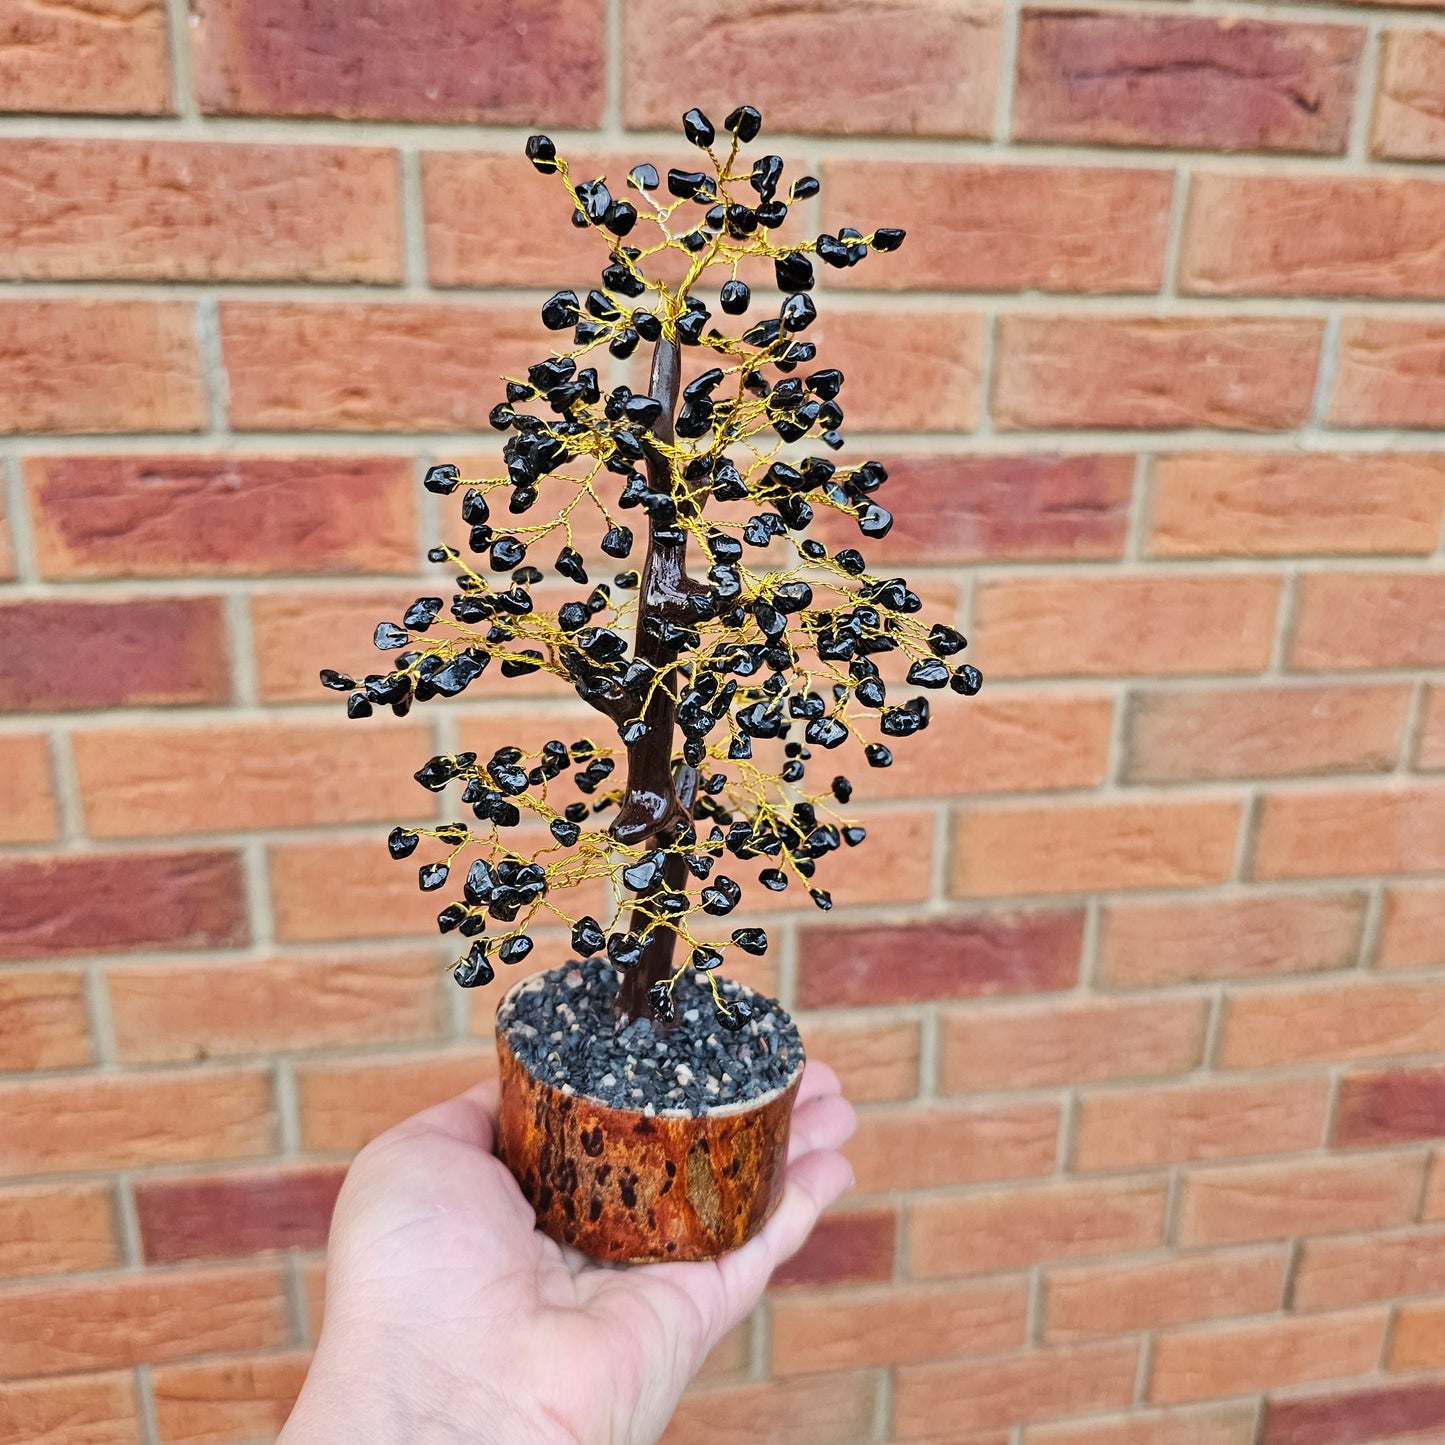 Black Tourmaline Gold Tree 26cm  | Natural Stone 300 chip beads | Birthday Gifts, Anniversary Gifts, Valentine's Day, Christmas, Easter, Eid, Mother's Day, Diwali, Hannukah, Women's, Girl's, Gifts for her, Gifts for Girlfriend, Gifts for Mom, Gifts for Mum, Gifts for Friend, Handmade Gifts, Handmade Jewelry, New Year's Eve, Graduation, Boho, Hippie, Minimalist, Gemstone, Crystal, Crystal Healing